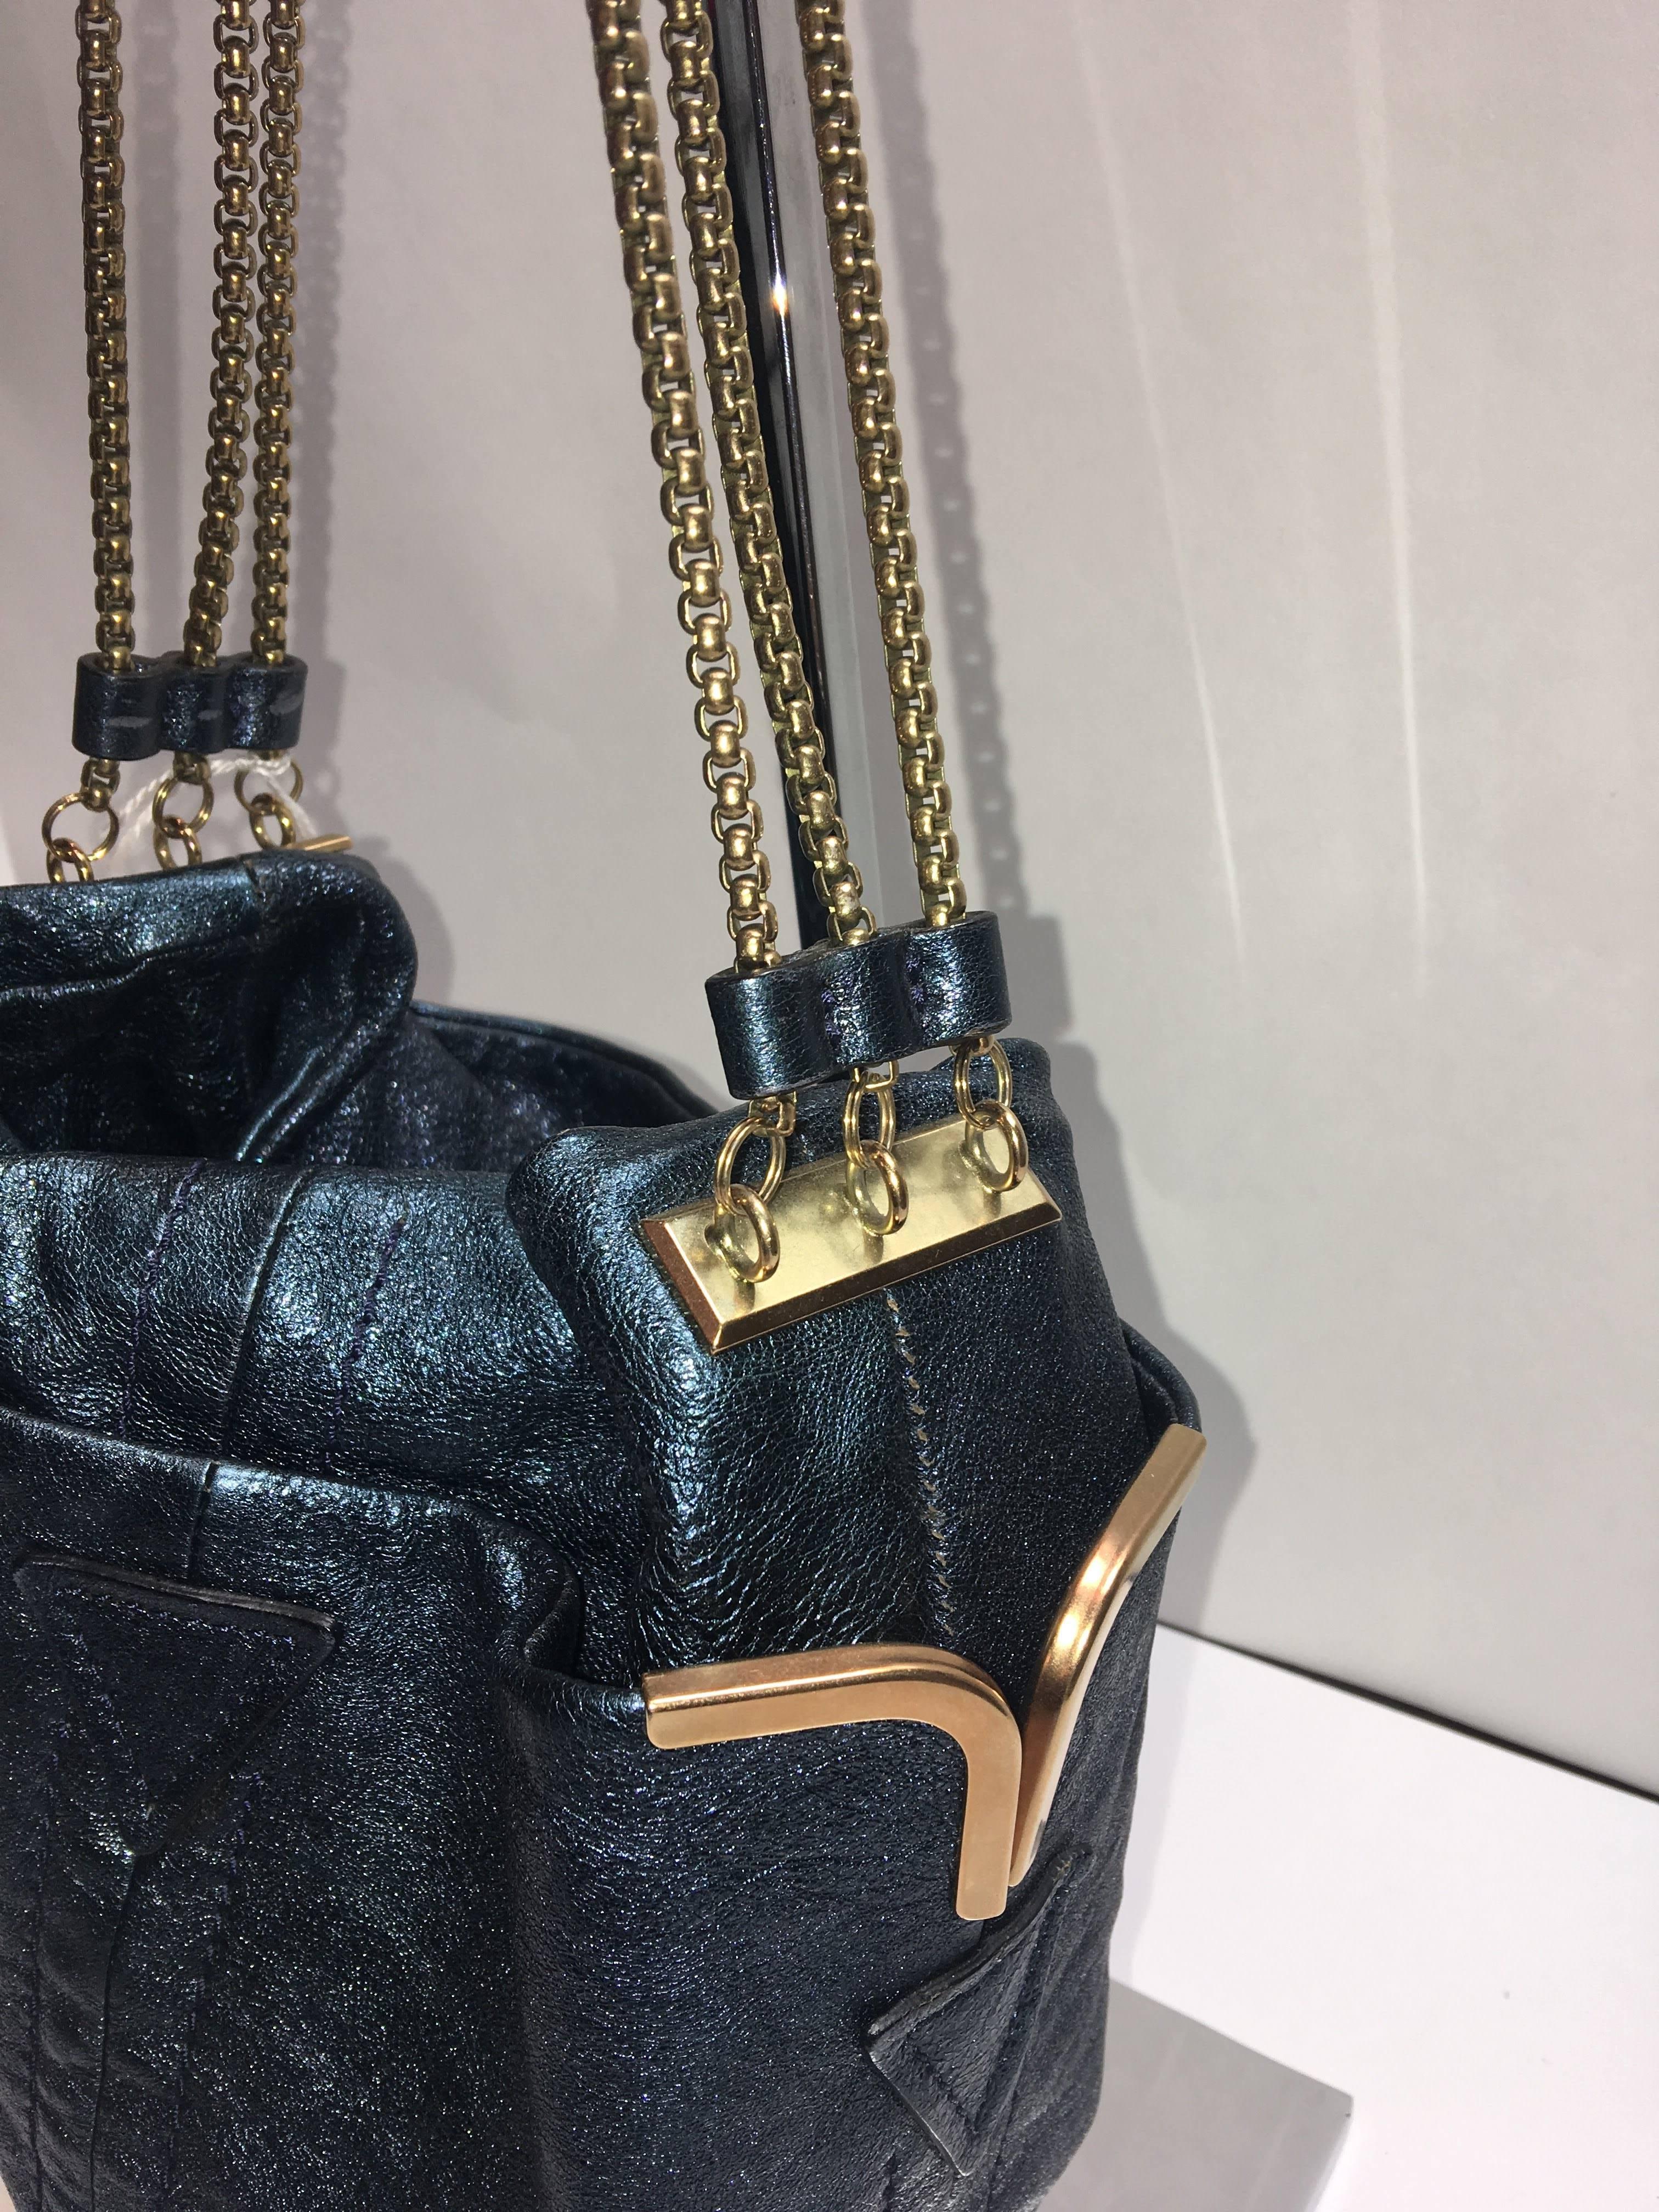 Chloe Blue Metallic Single Strap Shoulder Bag with Triple Gold Link and Magnetic Closure. 